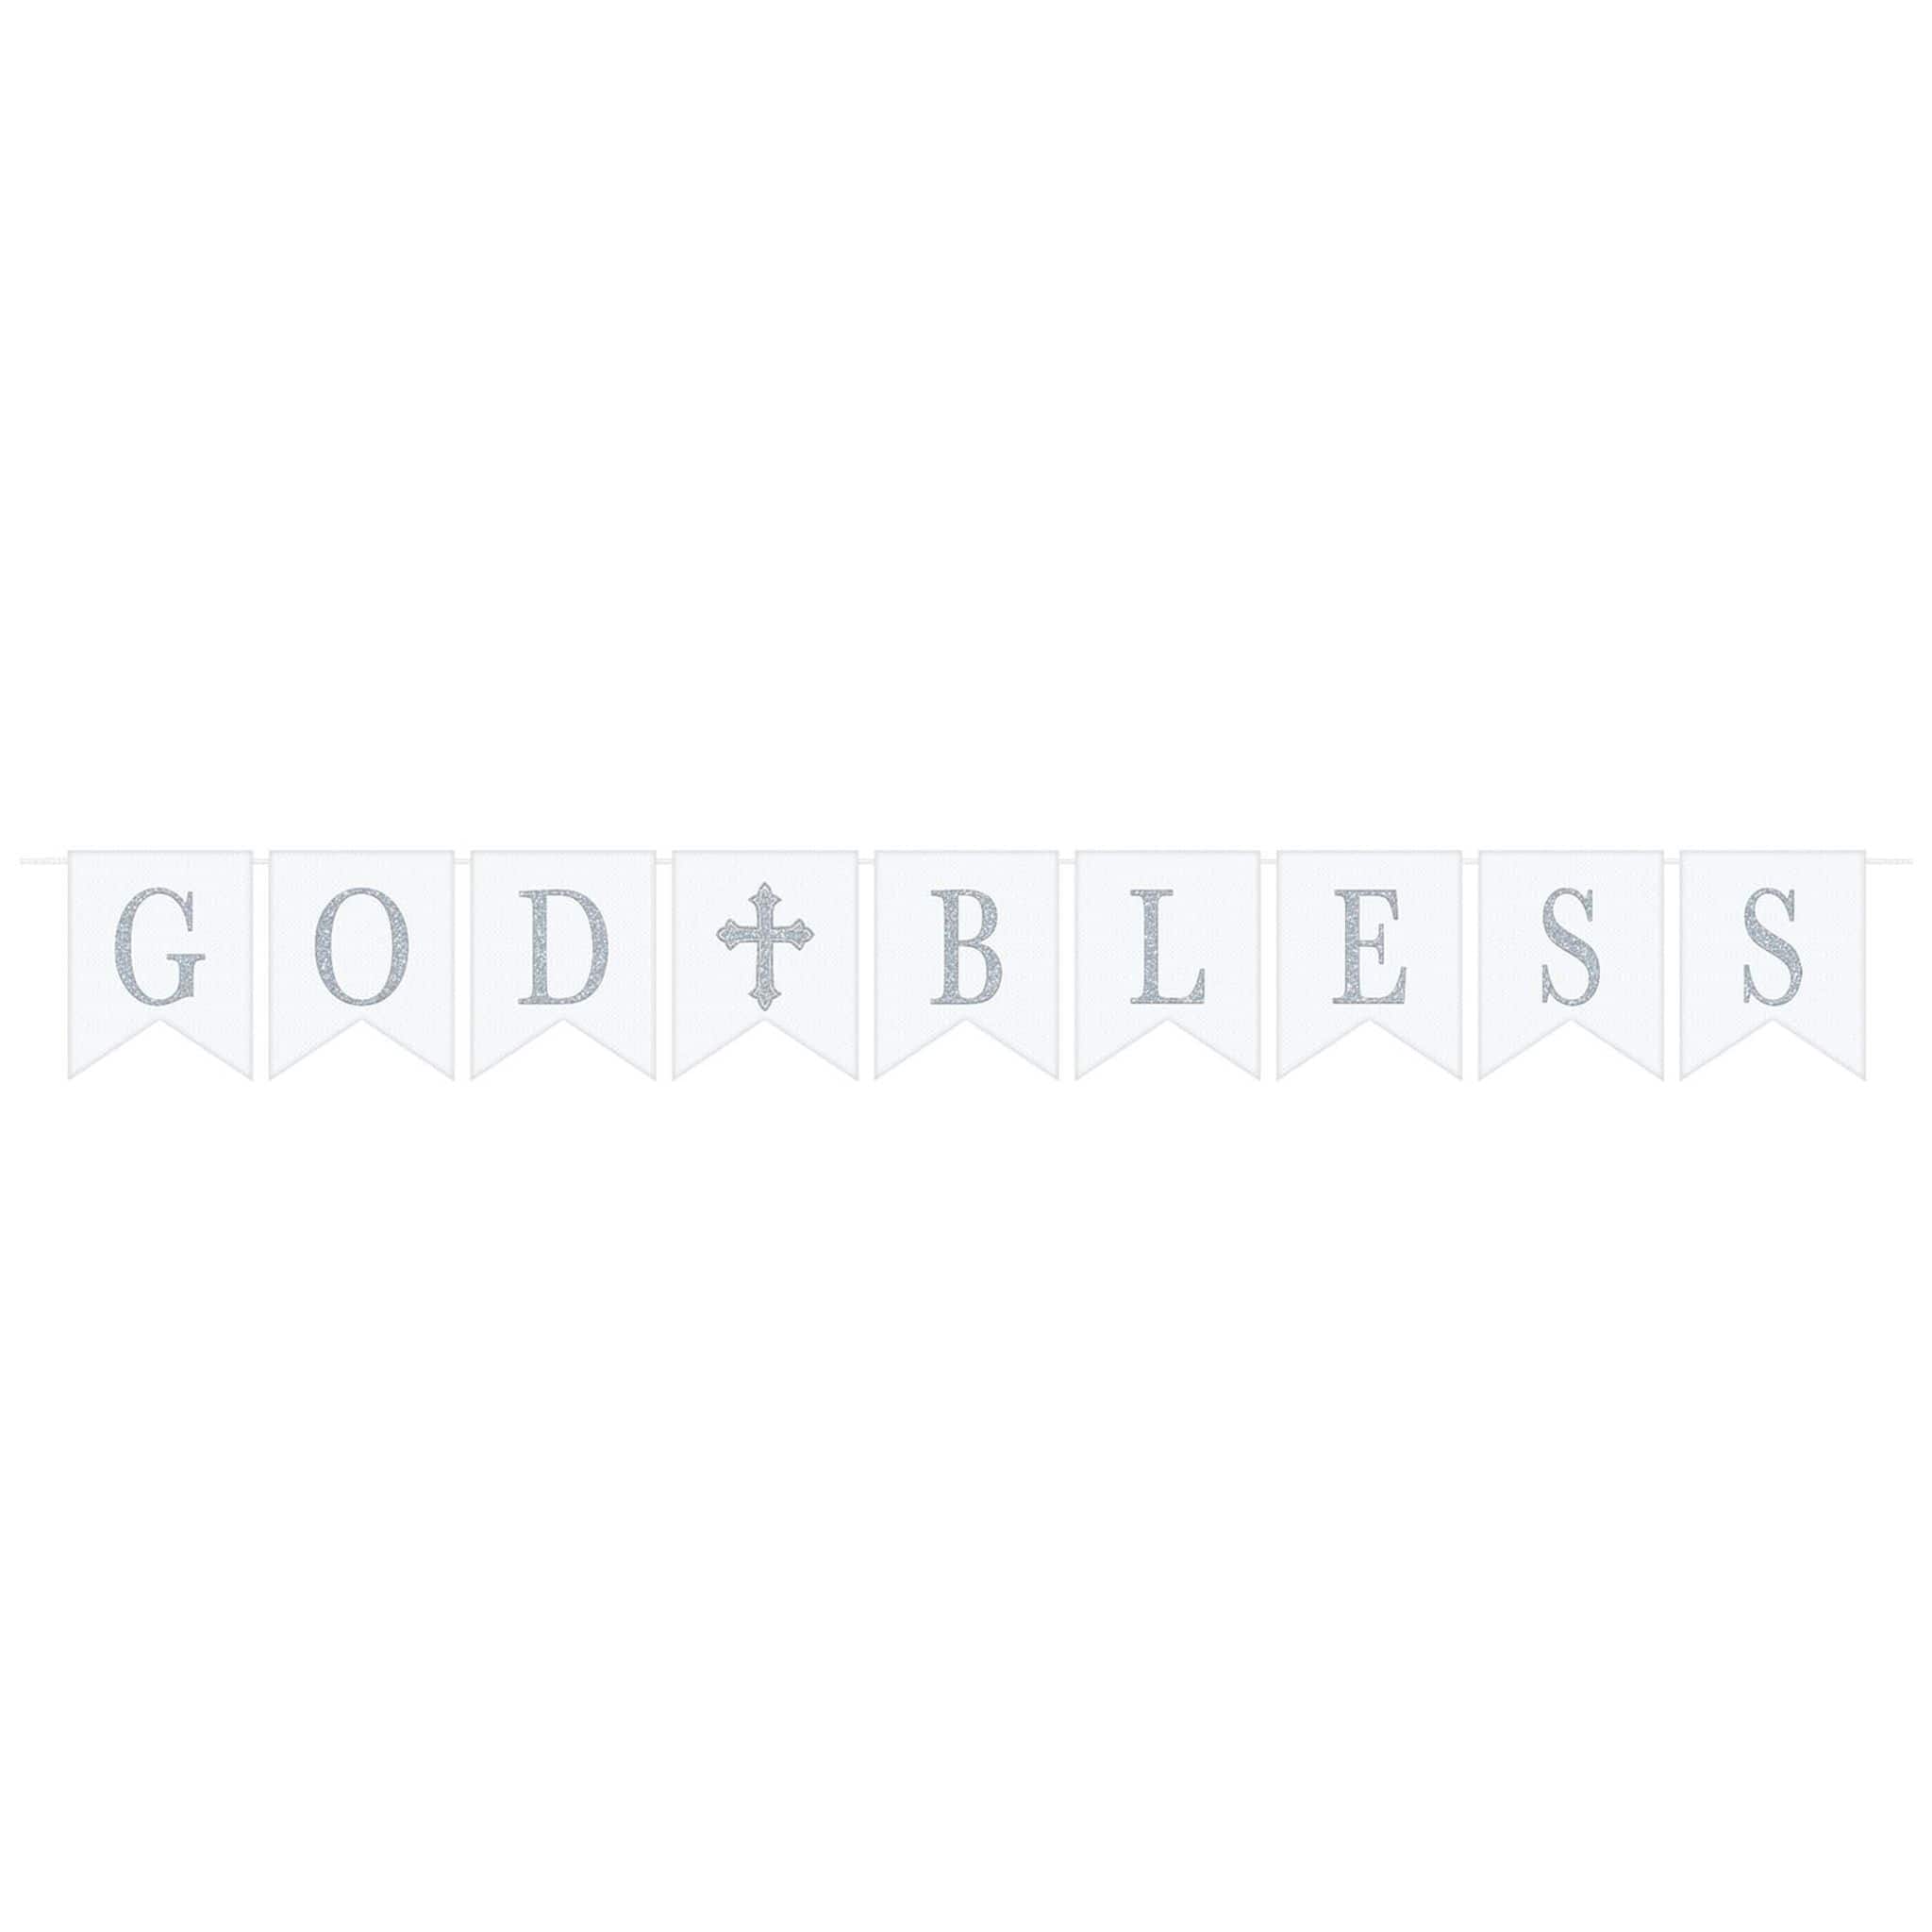 101&#x27;&#x27; God Bless Holy Day Pennant Banner